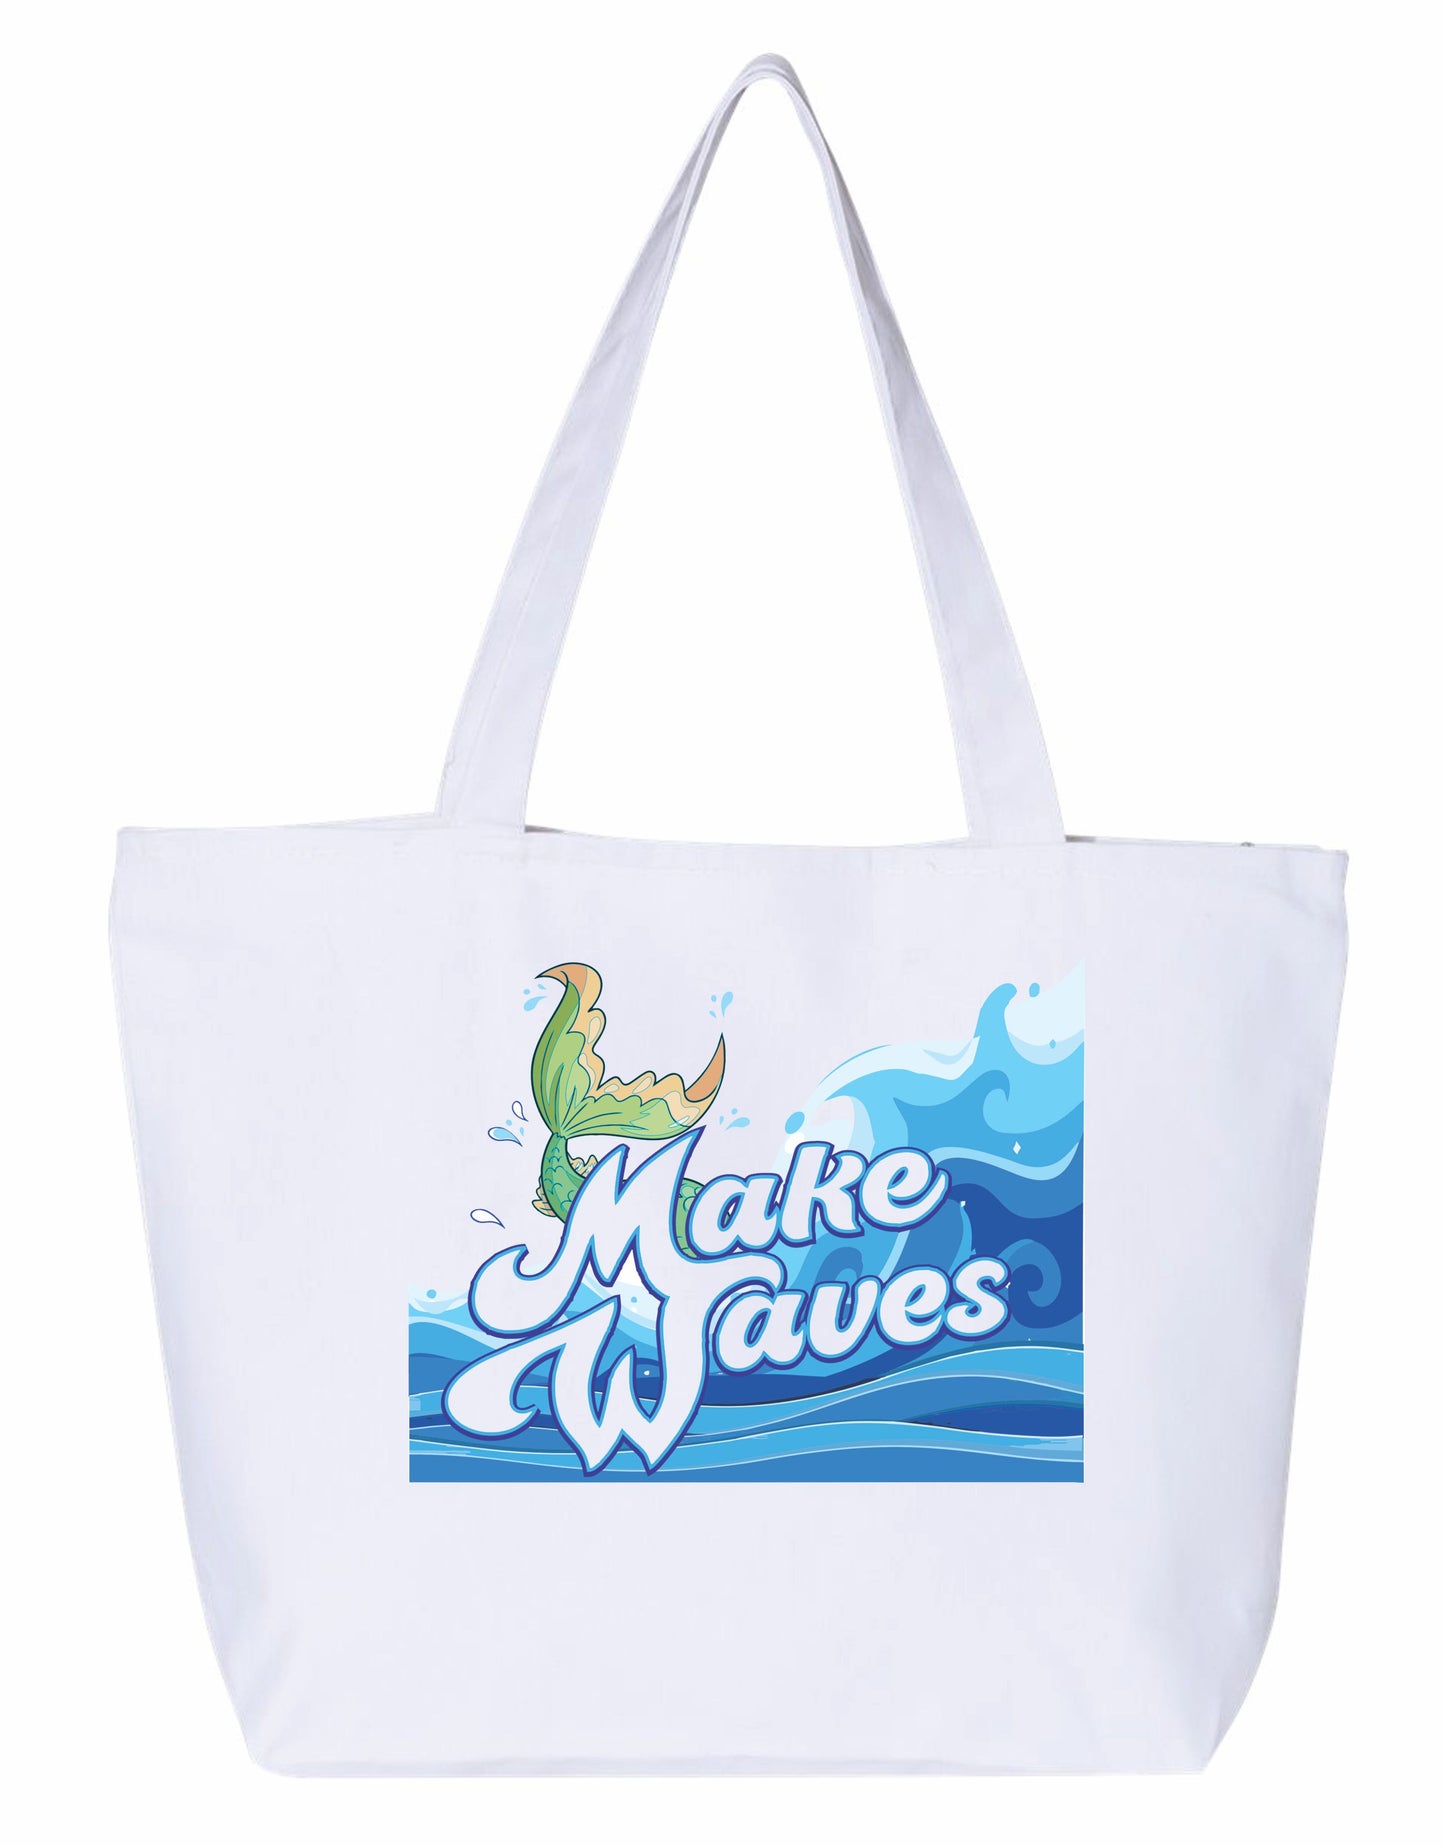 Make waves mermaid tail Heavy weight cotton canvas large zippered tote bag